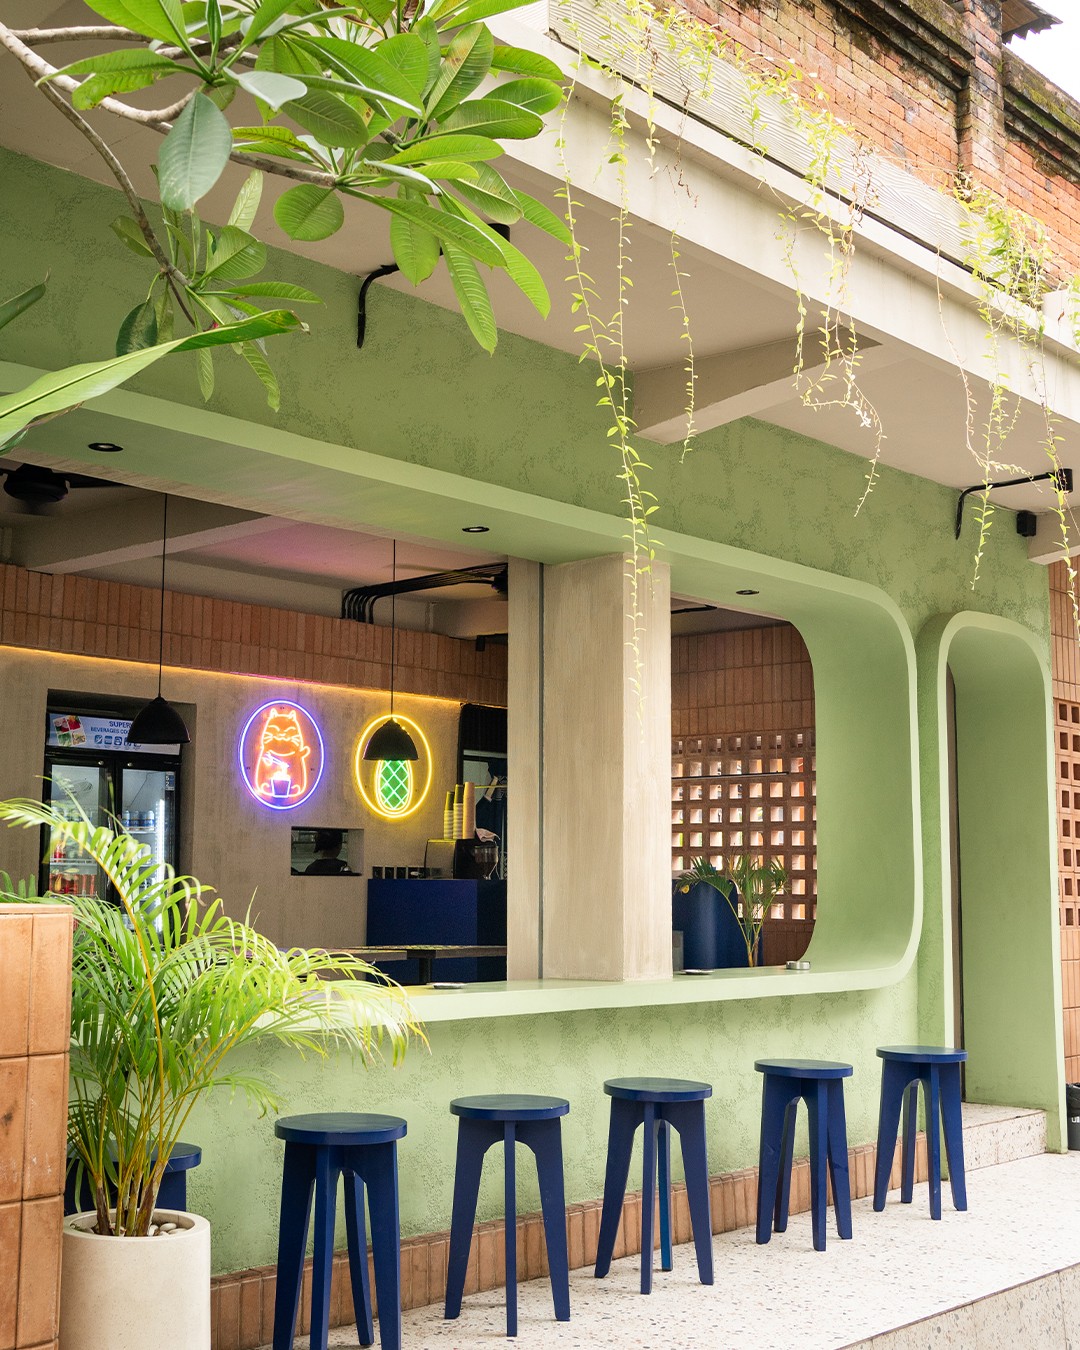 Bright green-themed cafe with neon signs, blue bar stools, hanging plants, and a wooden accented counter.